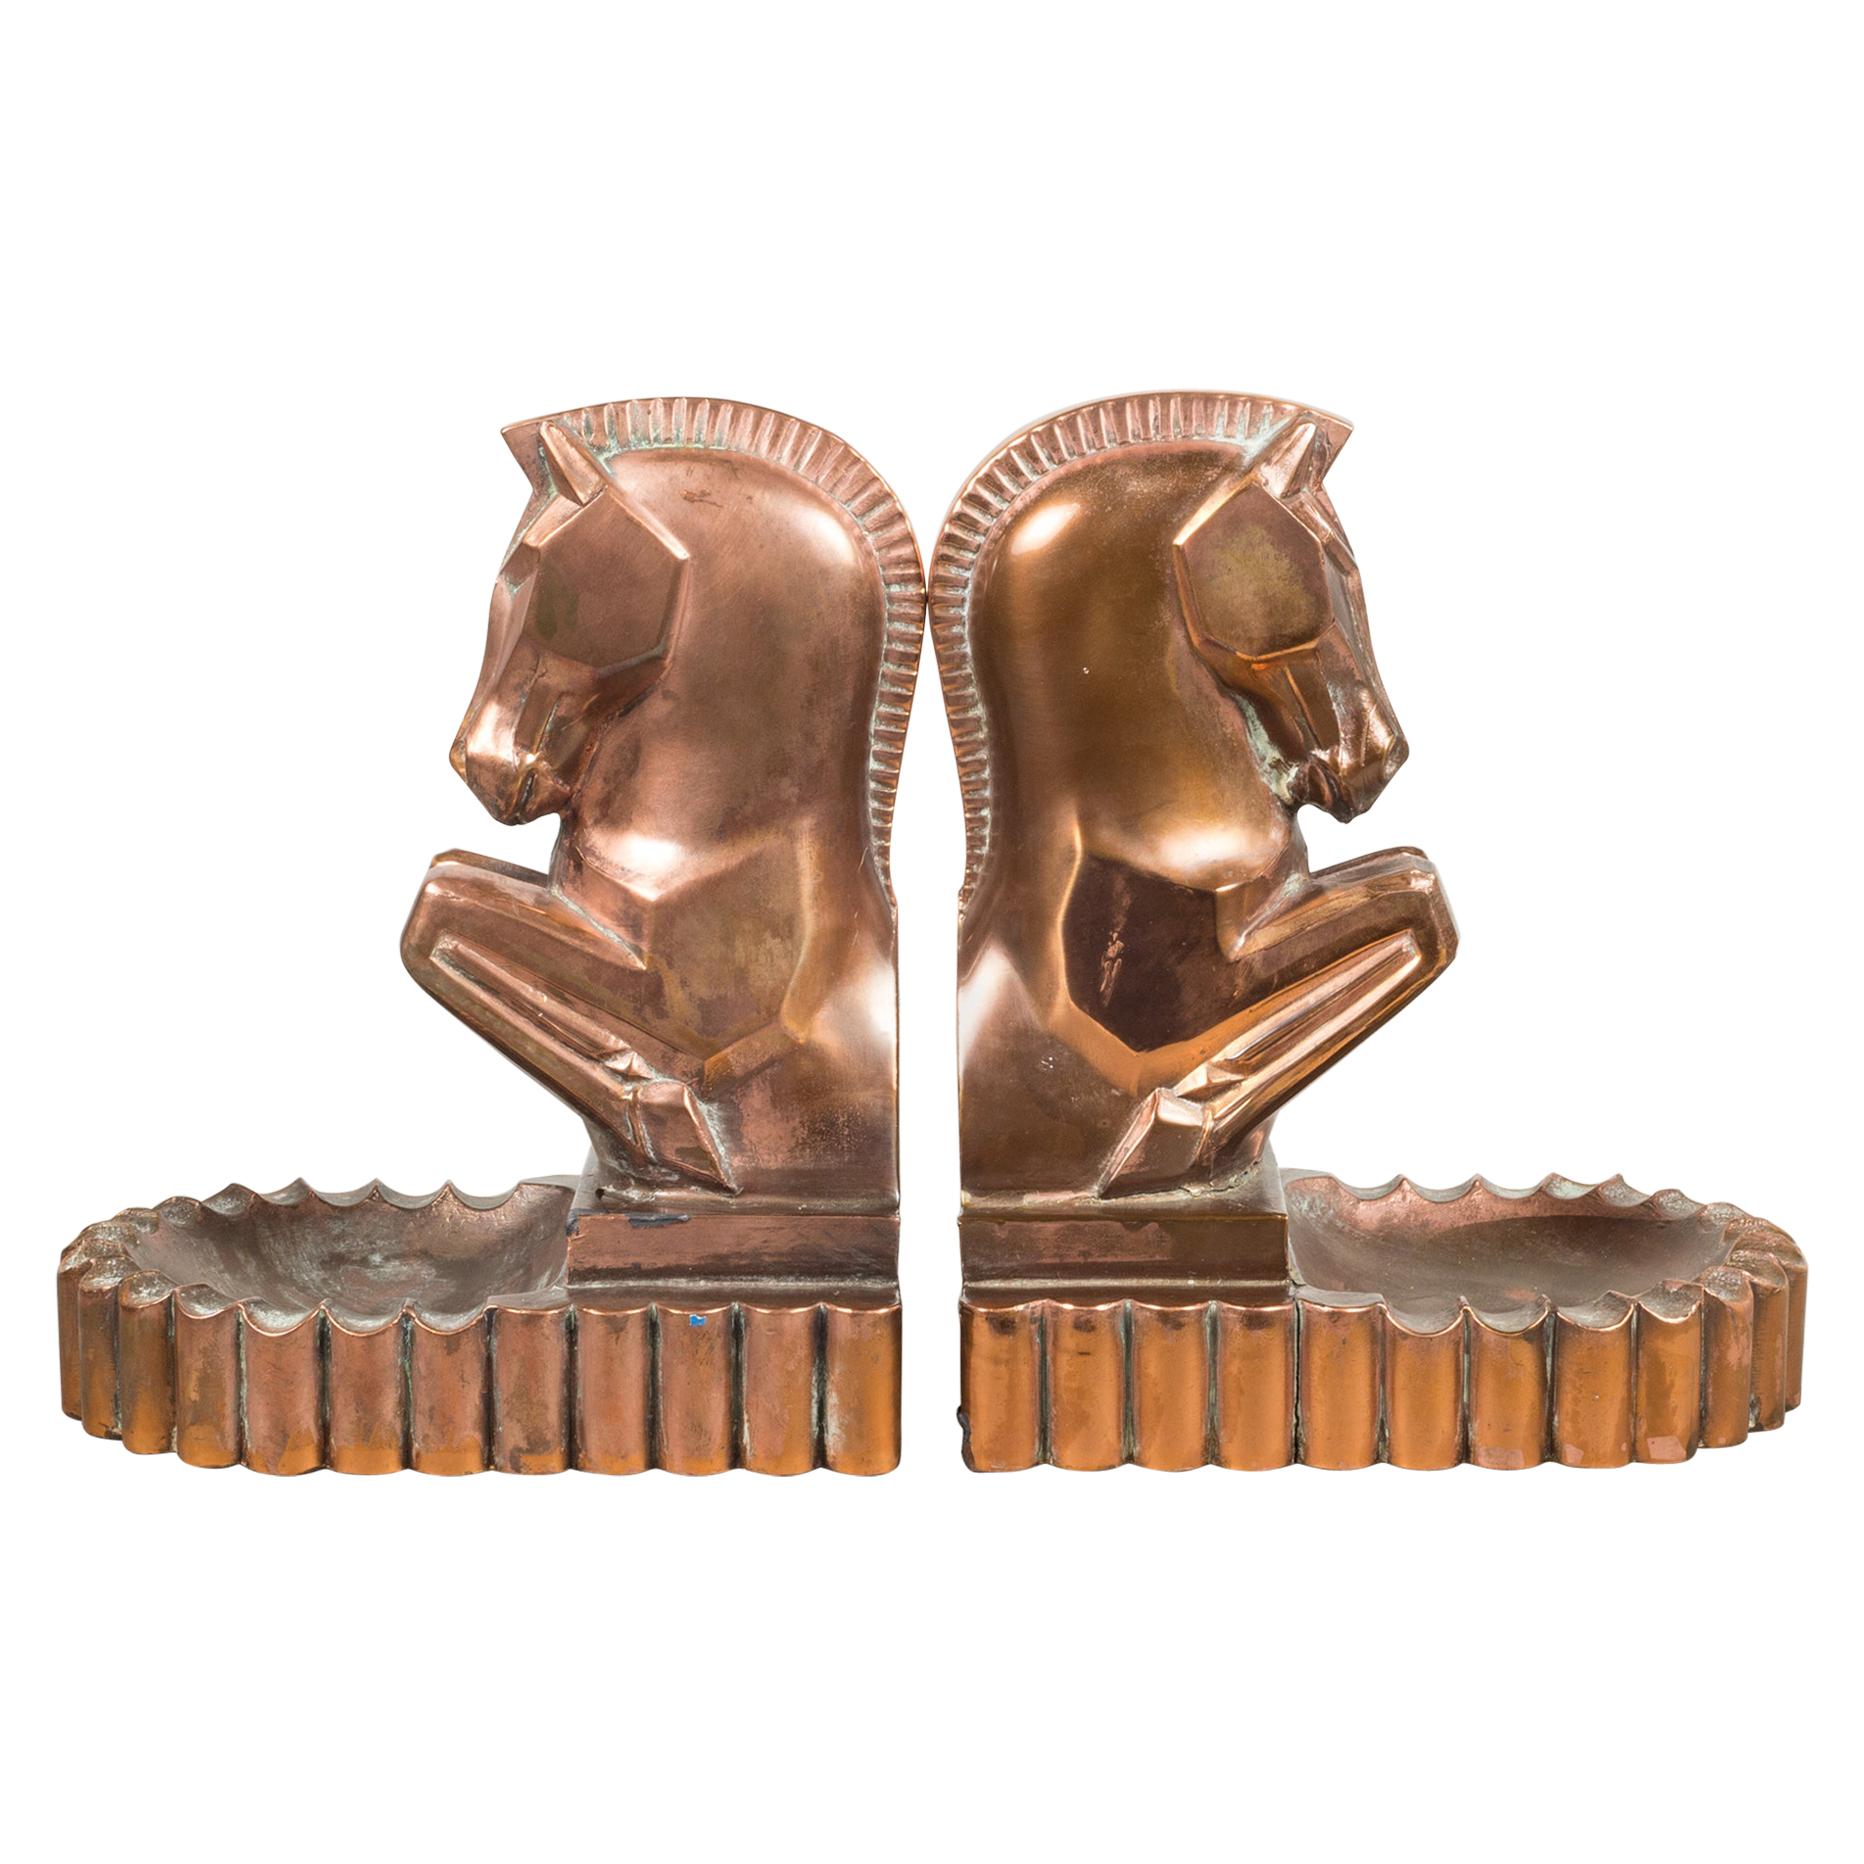 Art Deco Bronze/Copper-Plated Trojan Horse Bookends by Champion Products c.1930